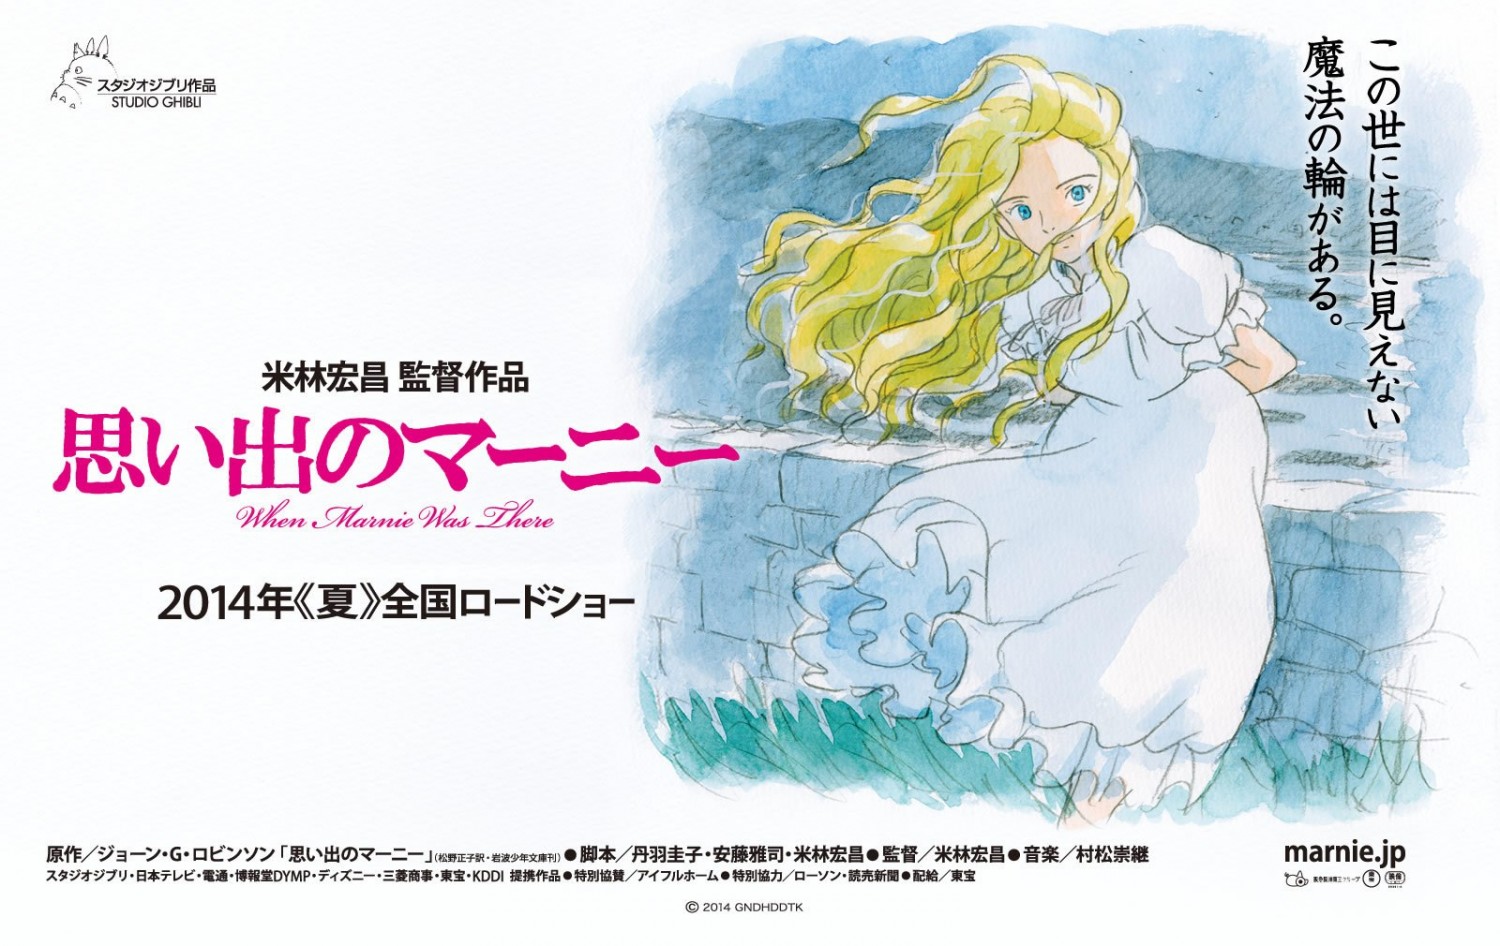 Extra Large Movie Poster Image for Omoide no Marnie 